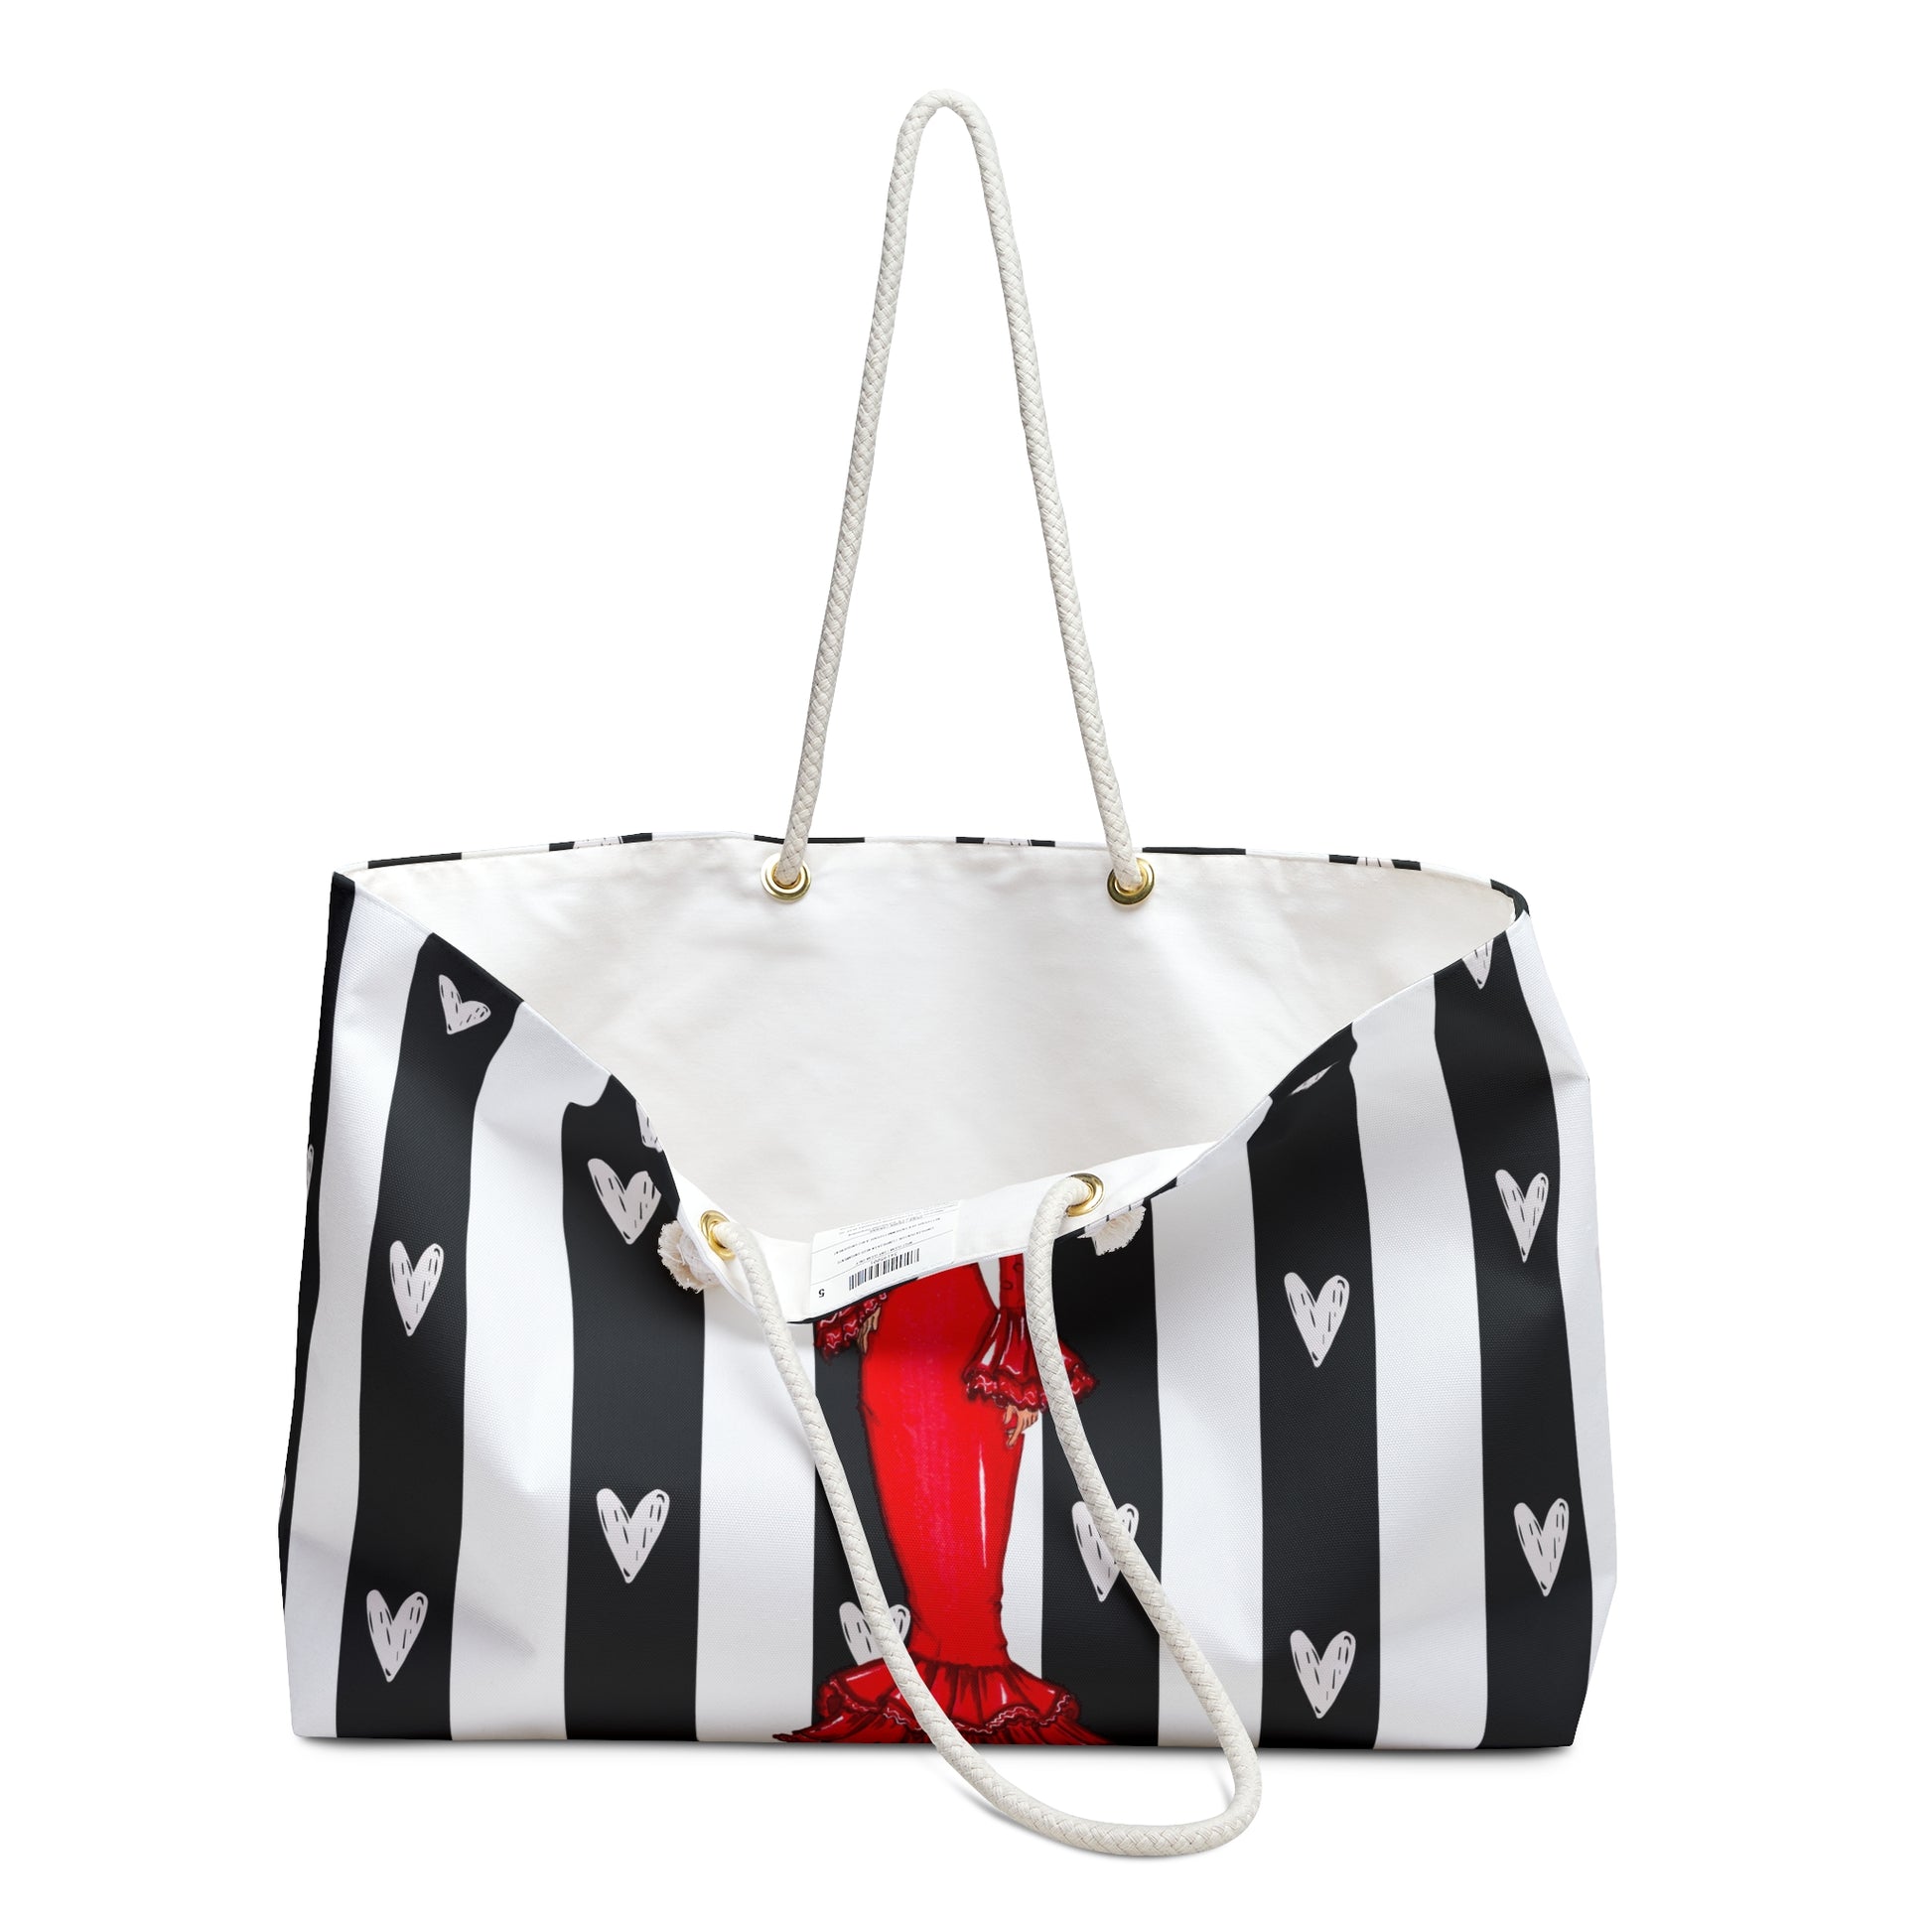 a black and white striped bag with hearts on it